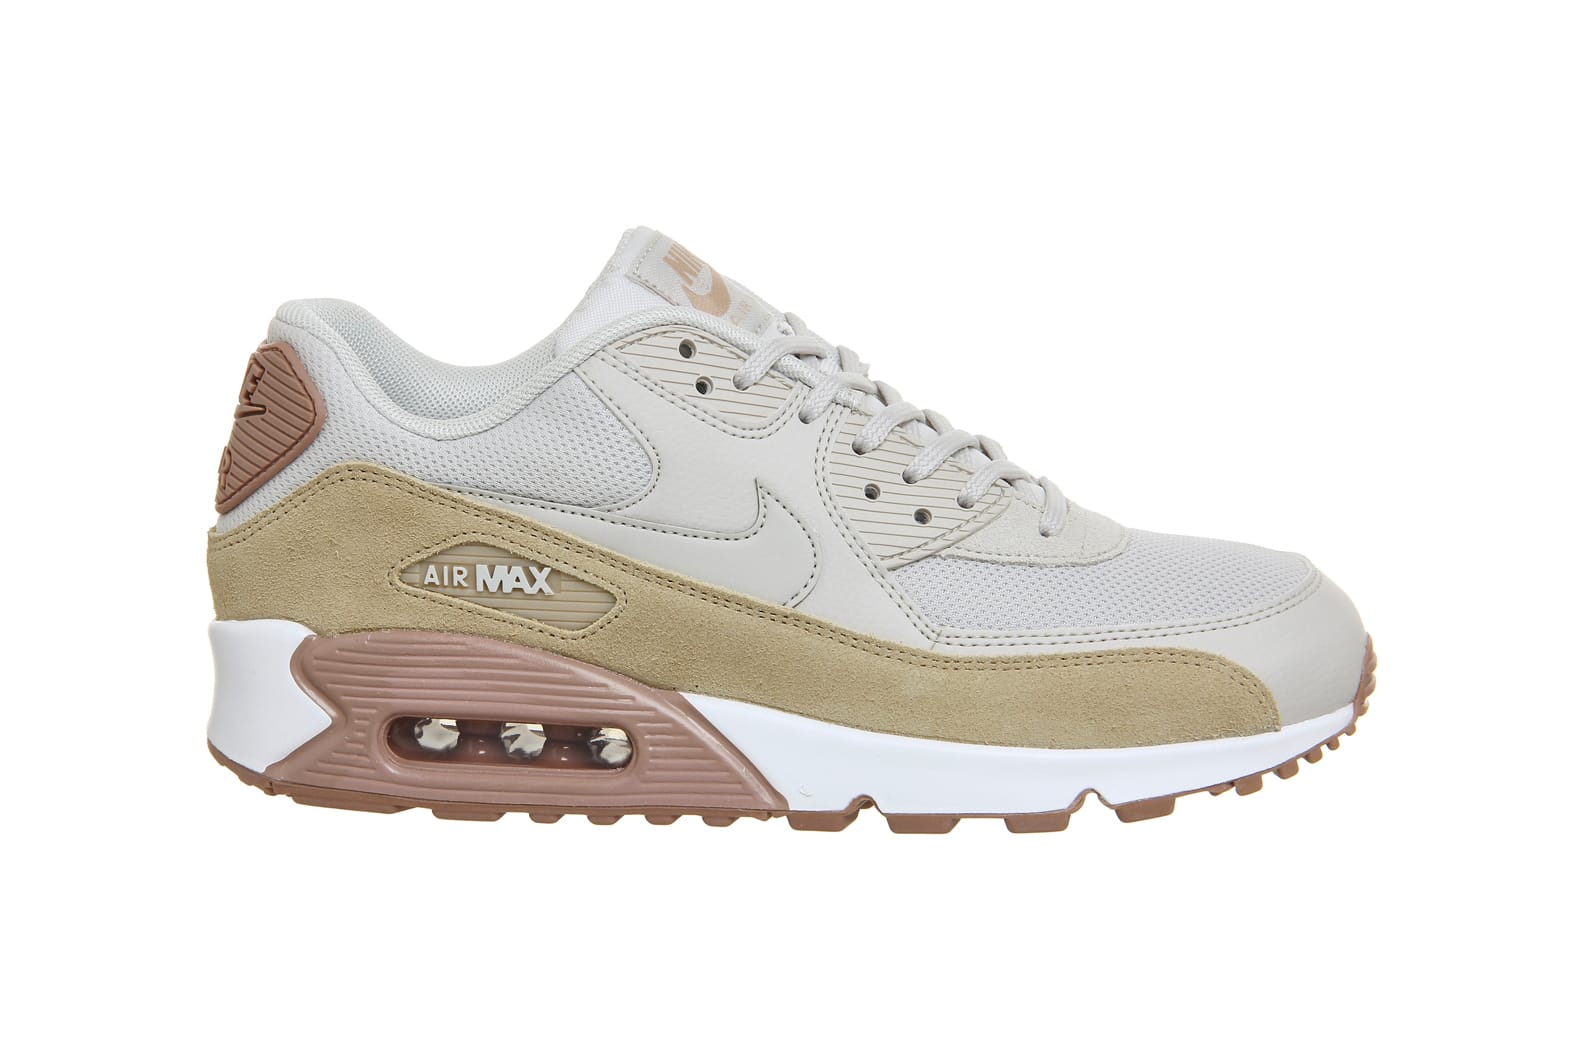 Nike's Air Max 90 Gets Laced With 